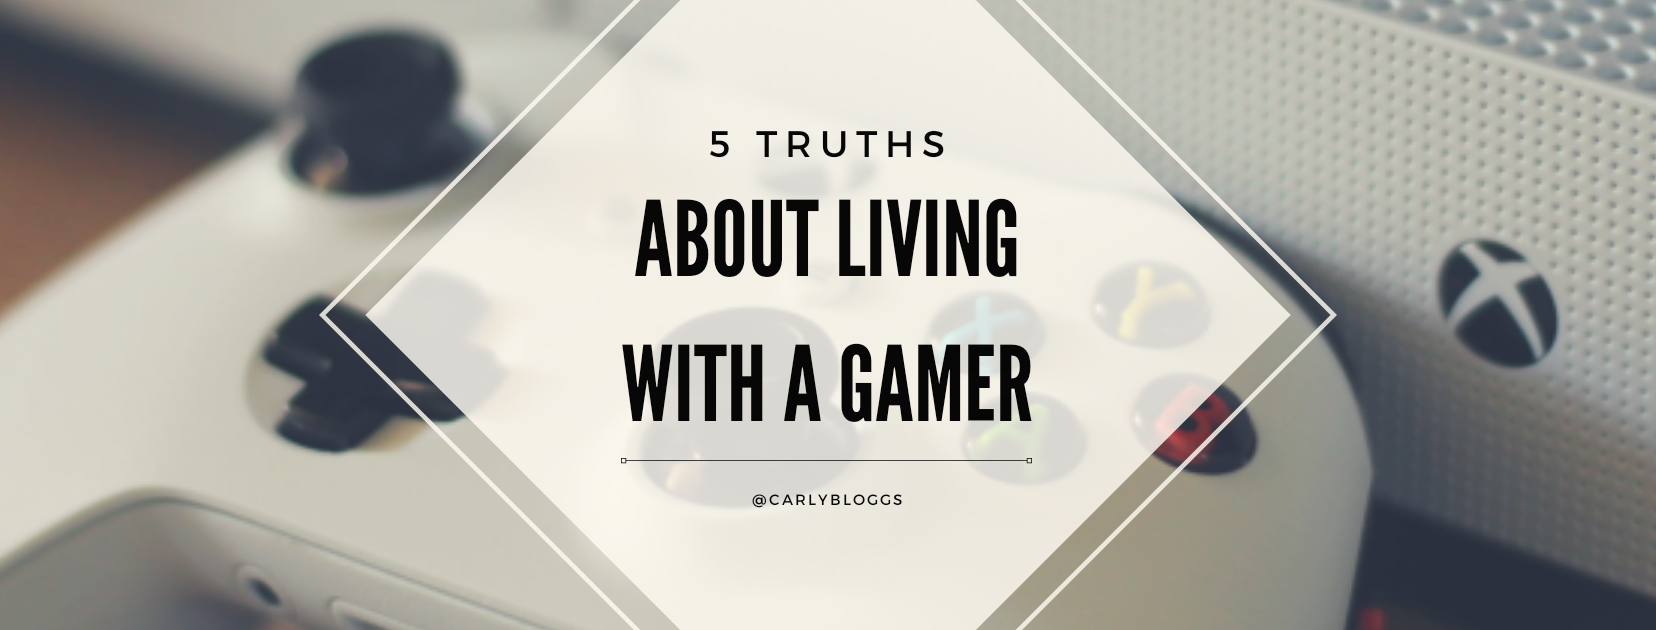 5 Truths About Living With A Gamer - Carly Bloggs